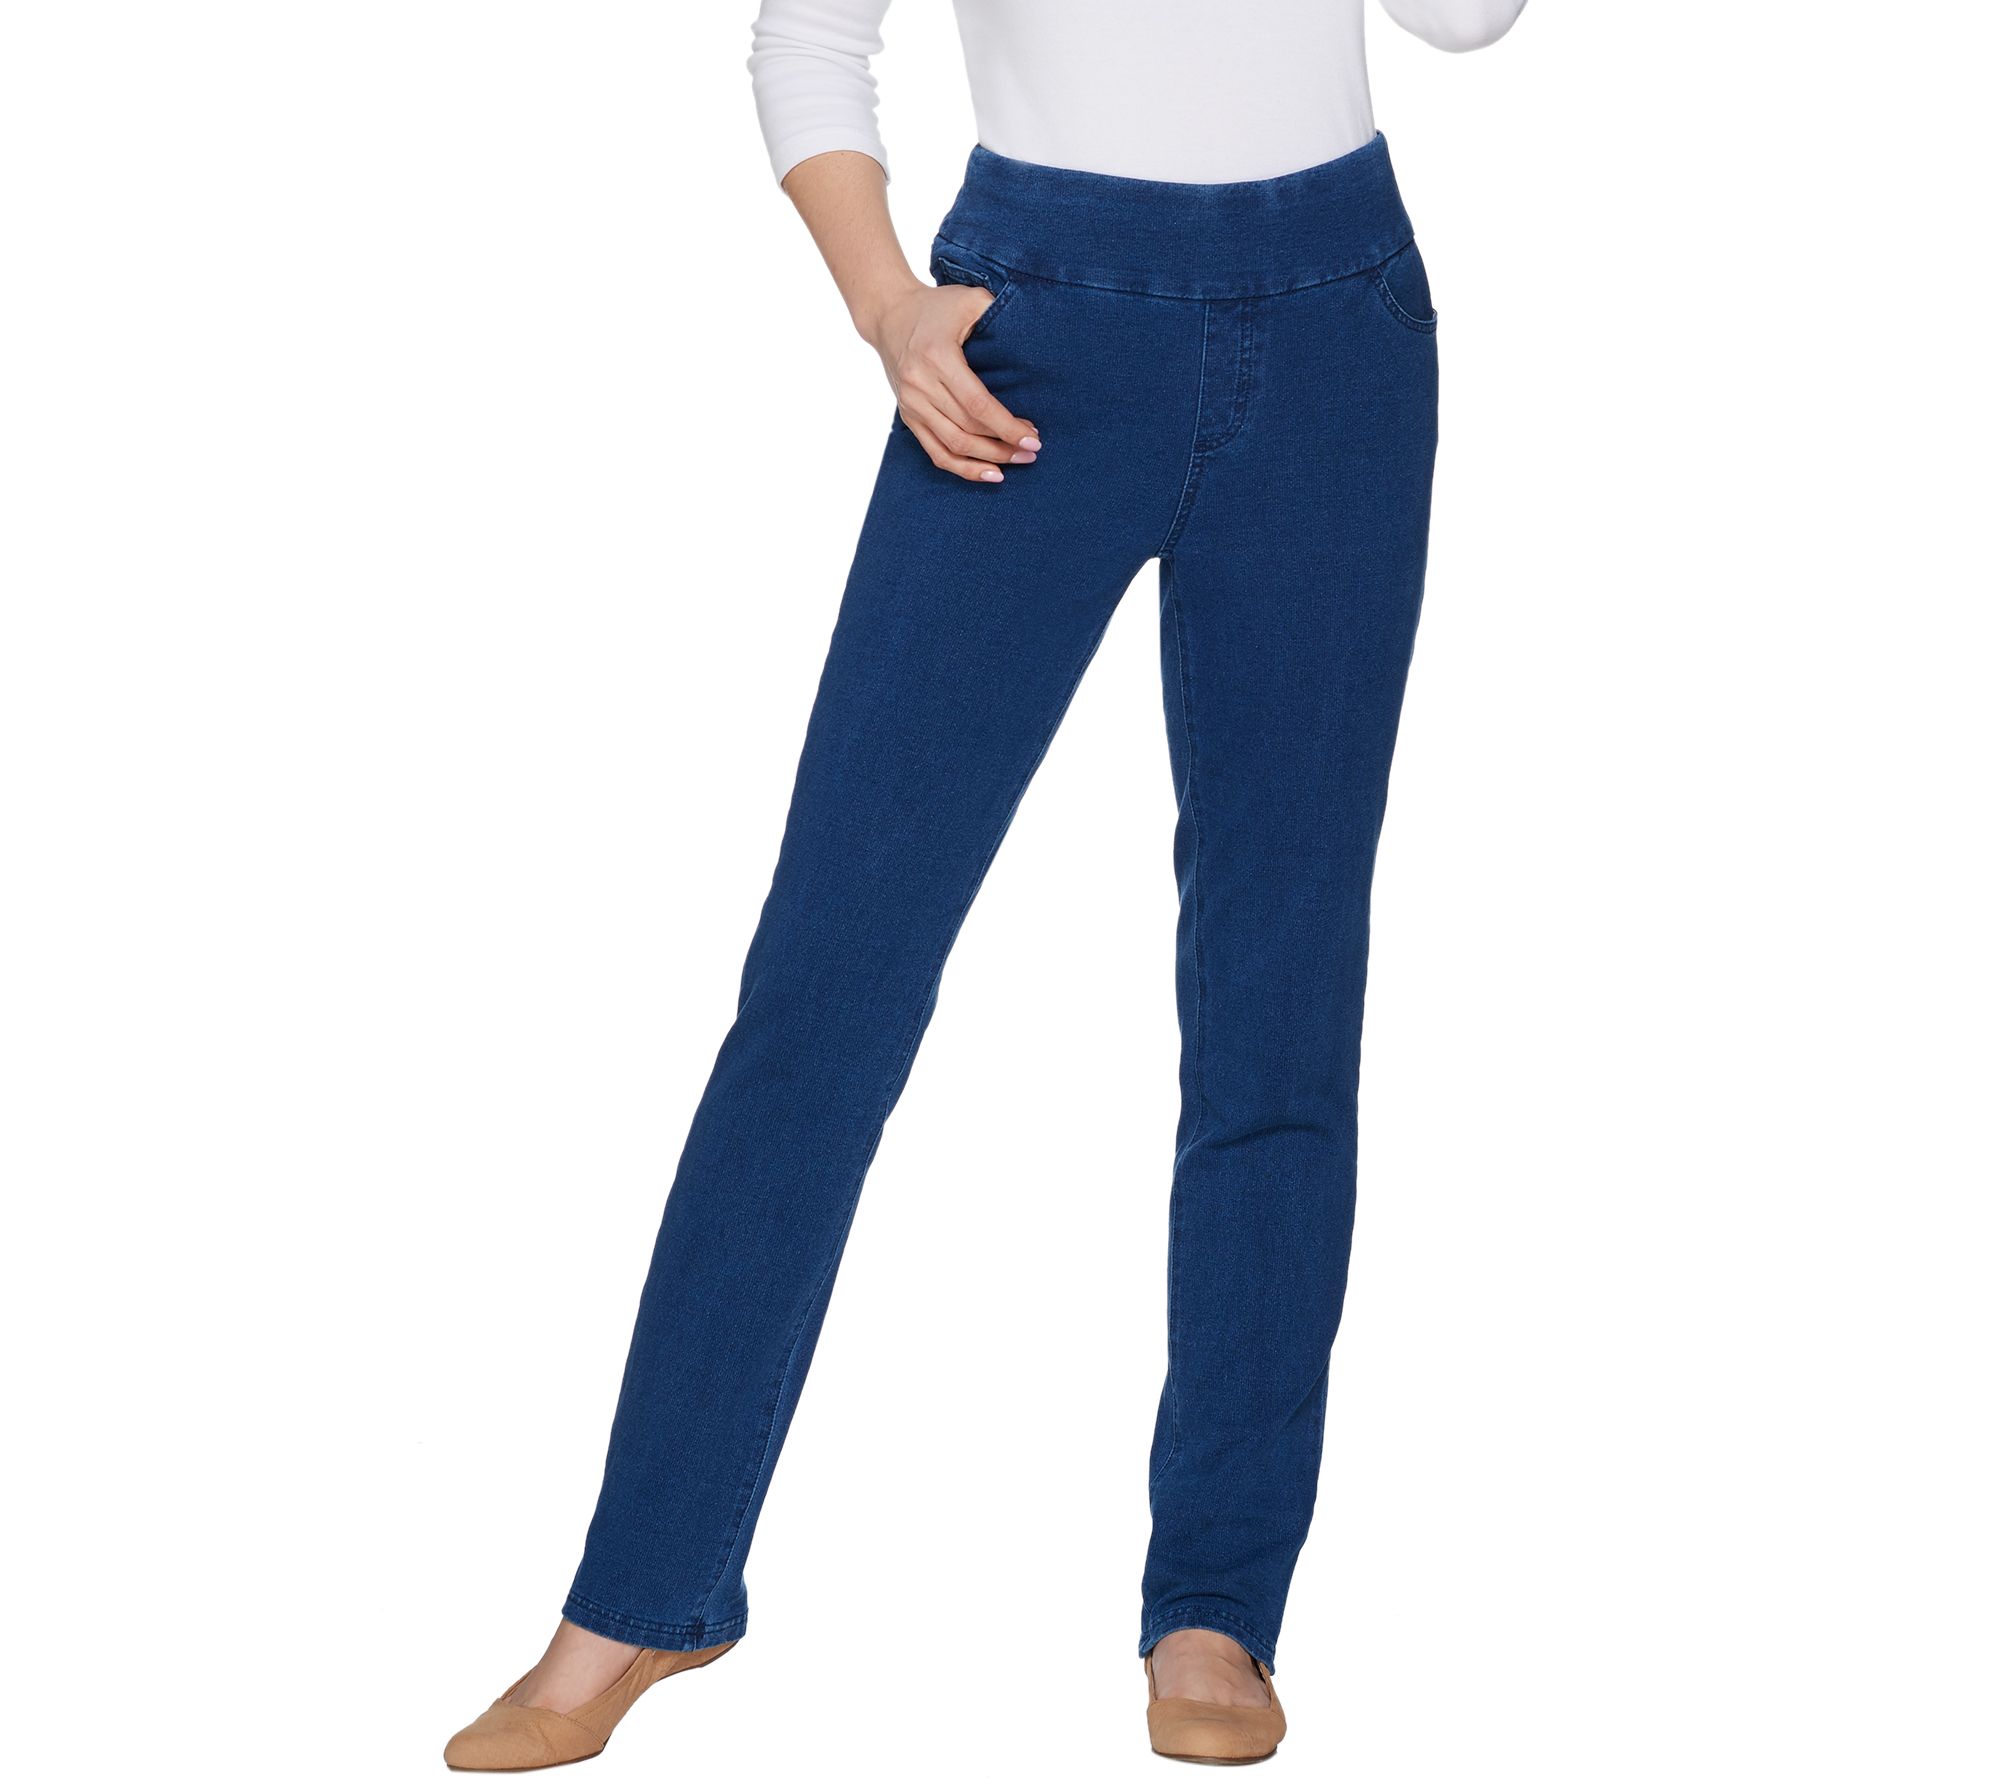 Buy RealSize Women's Stretch Elastic Waist Pull-On Pants Jeggings